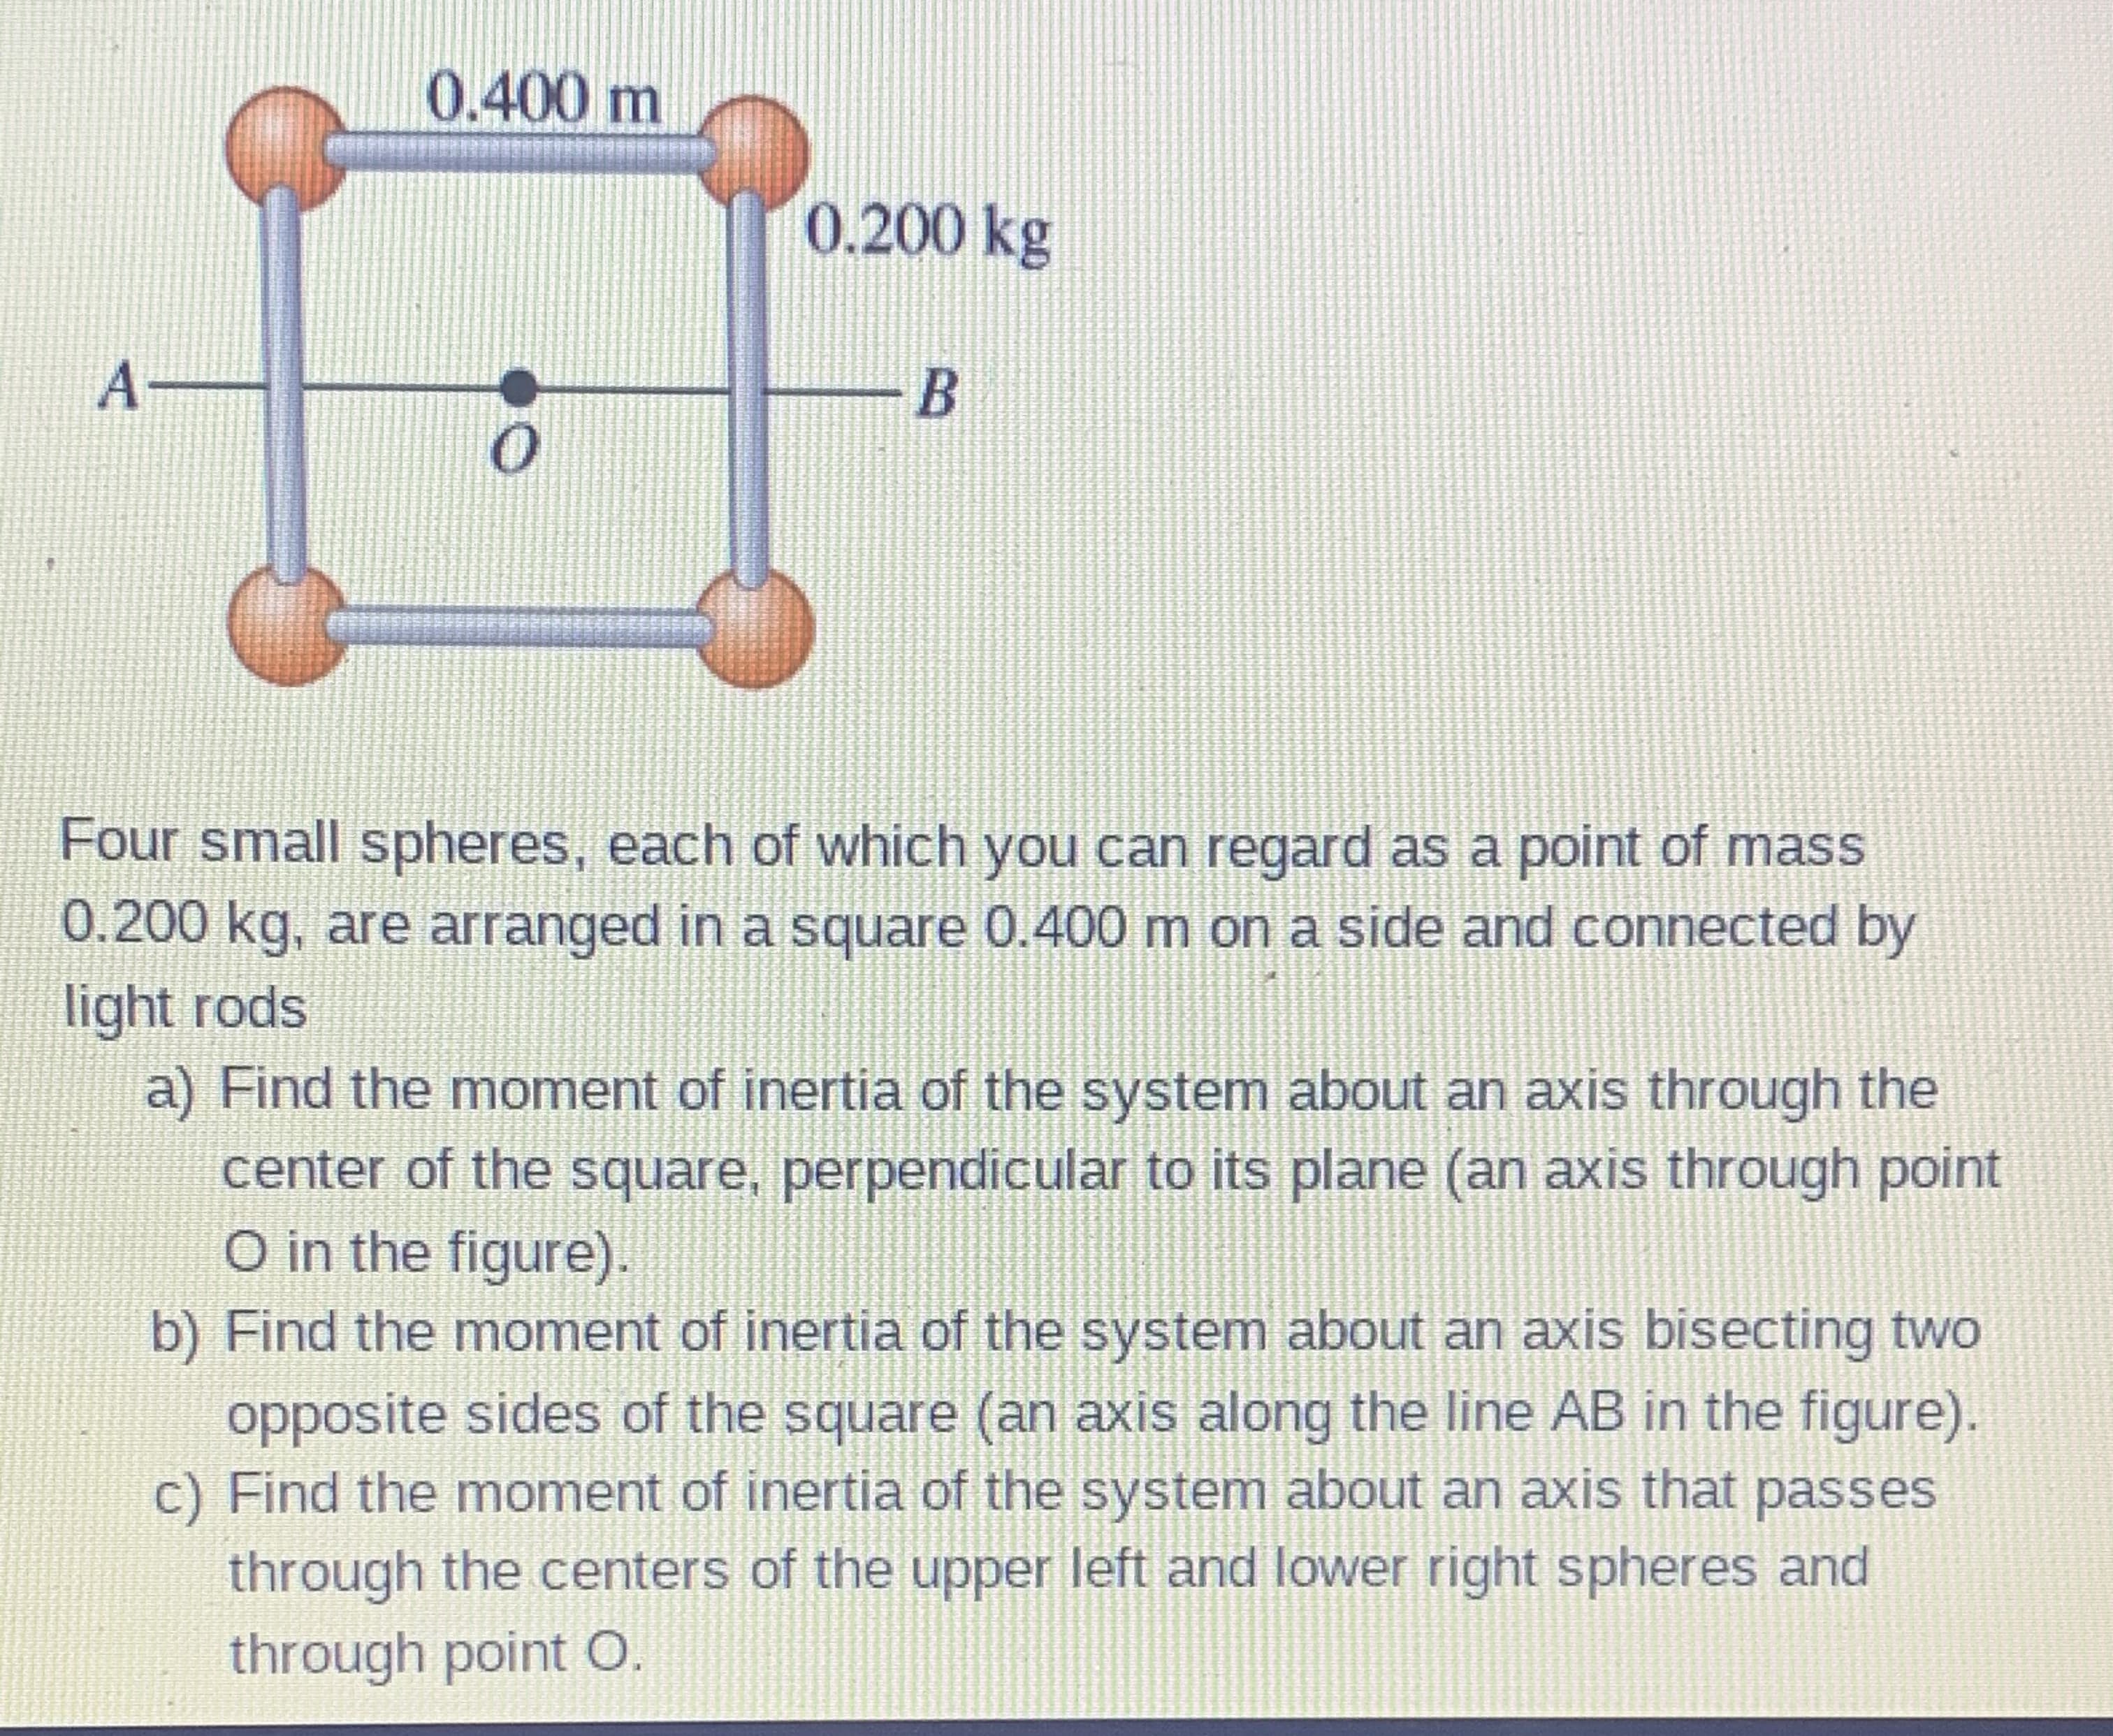 Four small spheres, each of which you can regard as a point of mass
0.200 kg, are arranged in a square 0.400 m on a side and connected by
light rods
a) Find the moment of inertia of the system about an axis through the
center of the square, perpendicular to its plane (an axis through point
O in the figure).
